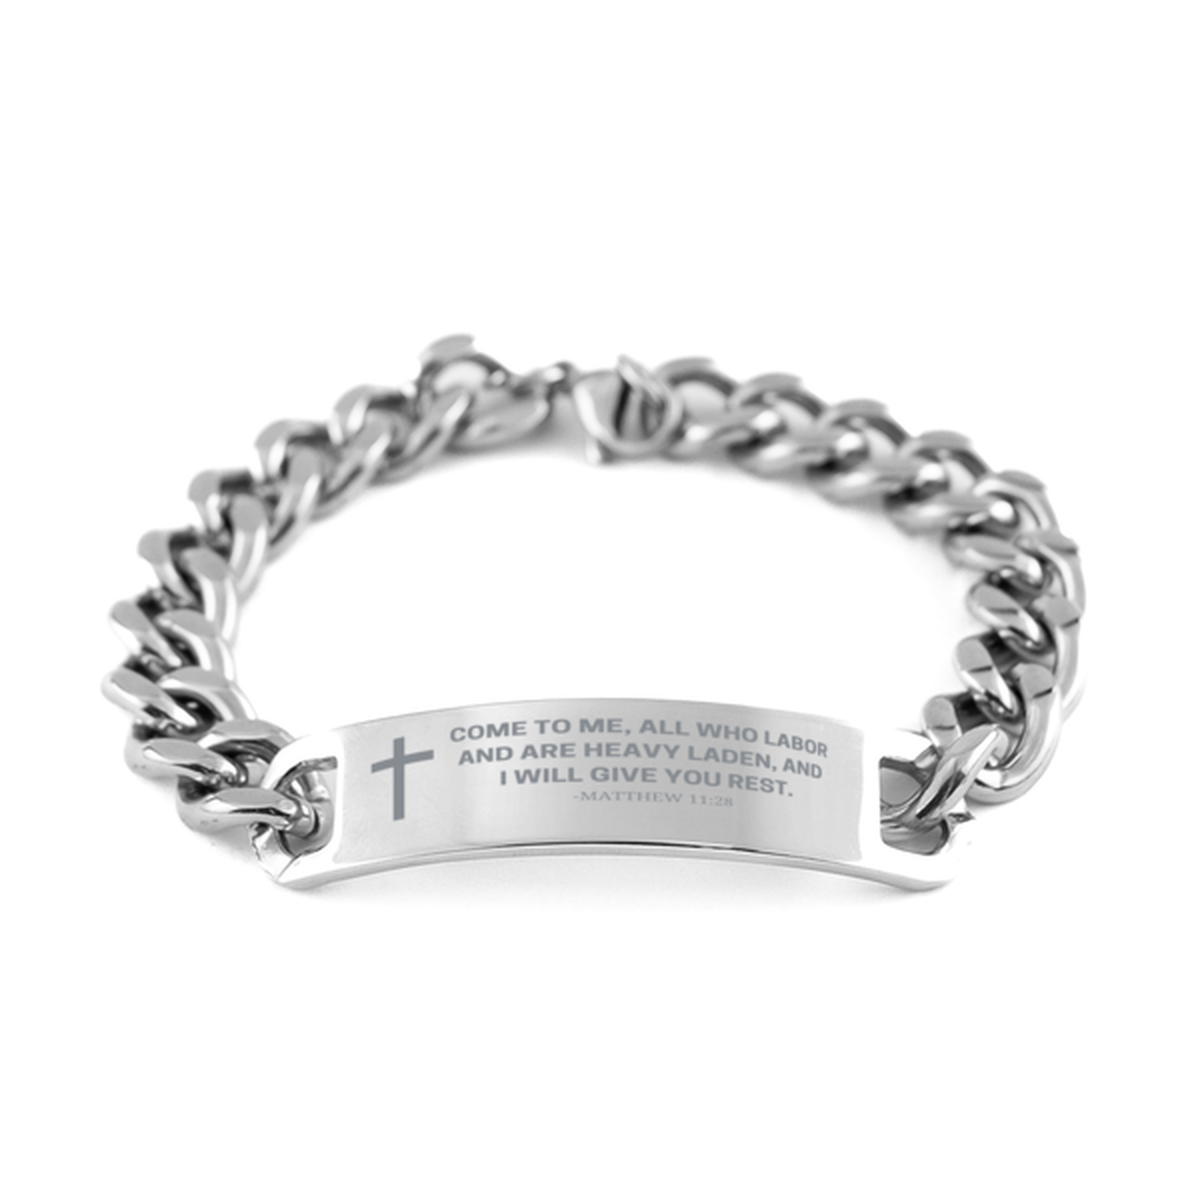 Baptism Gifts For Teenage Boys Girls, Christian Bible Verse Cuban Chain Bracelet, Come to me, all who labor, Catholic Confirmation Gifts for Son, Godson, Grandson, Nephew